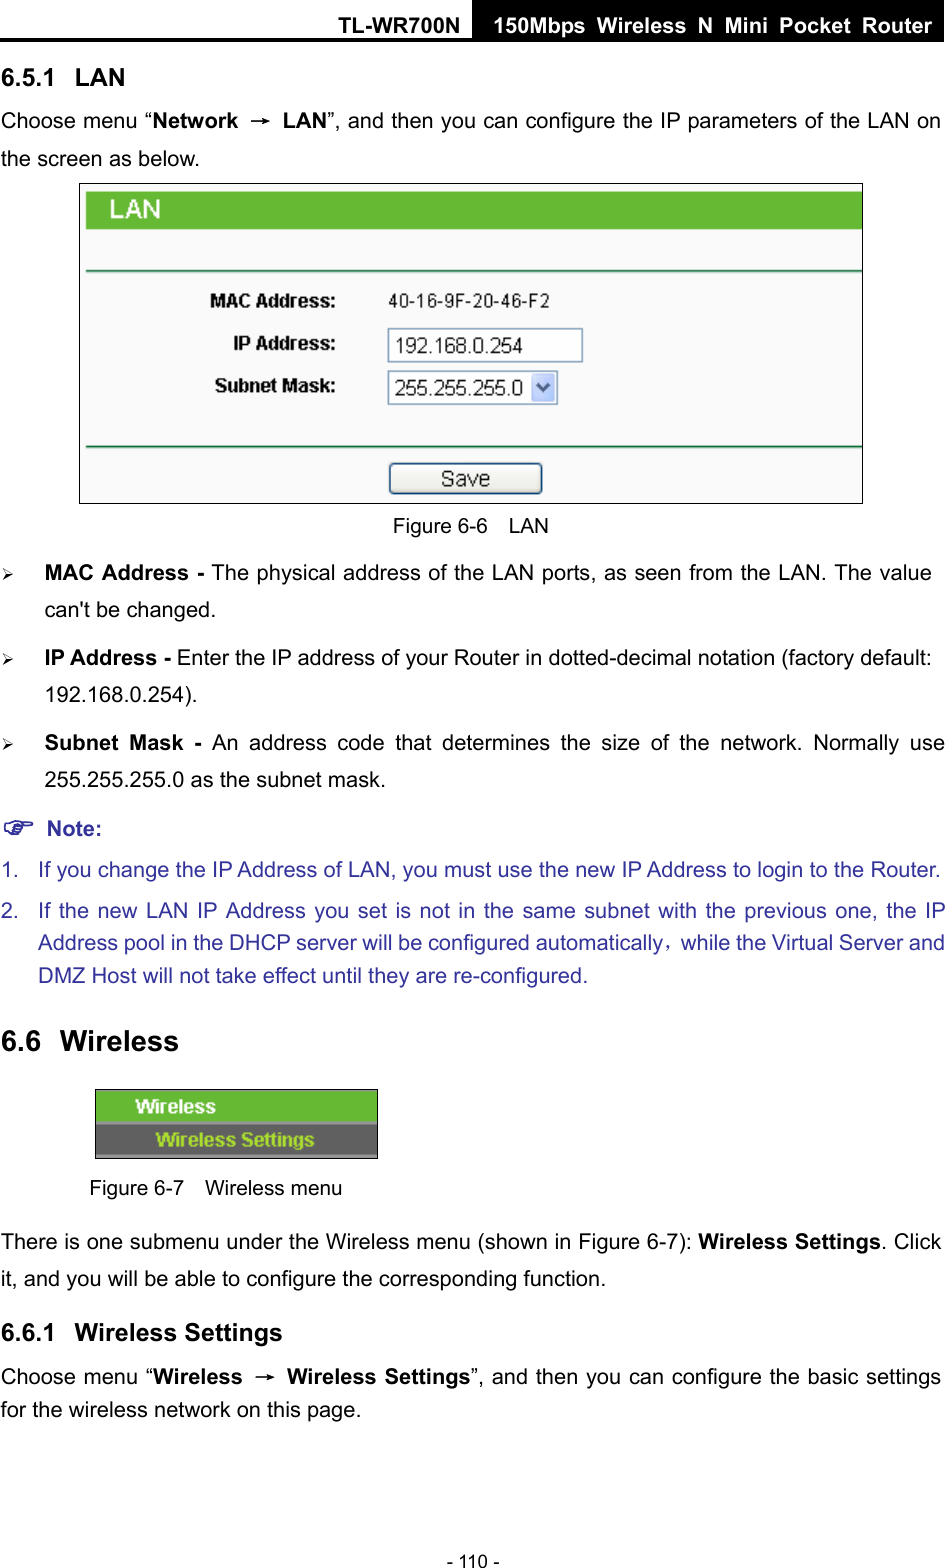 TL-WR700N 150Mbps Wireless N Mini Pocket Router - 110 - 6.5.1  LAN Choose menu “Network  → LAN”, and then you can configure the IP parameters of the LAN on the screen as below.  Figure 6-6  LAN ¾ MAC Address - The physical address of the LAN ports, as seen from the LAN. The value can&apos;t be changed. ¾ IP Address - Enter the IP address of your Router in dotted-decimal notation (factory default: 192.168.0.254). ¾ Subnet Mask - An address code that determines the size of the network. Normally use 255.255.255.0 as the subnet mask.   ) Note: 1.  If you change the IP Address of LAN, you must use the new IP Address to login to the Router.   2.  If the new LAN IP Address you set is not in the same subnet with the previous one, the IP Address pool in the DHCP server will be configured automatically，while the Virtual Server and DMZ Host will not take effect until they are re-configured. 6.6  Wireless  Figure 6-7    Wireless menu There is one submenu under the Wireless menu (shown in Figure 6-7): Wireless Settings. Click it, and you will be able to configure the corresponding function.   6.6.1  Wireless Settings Choose menu “Wireless  → Wireless Settings”, and then you can configure the basic settings for the wireless network on this page. 